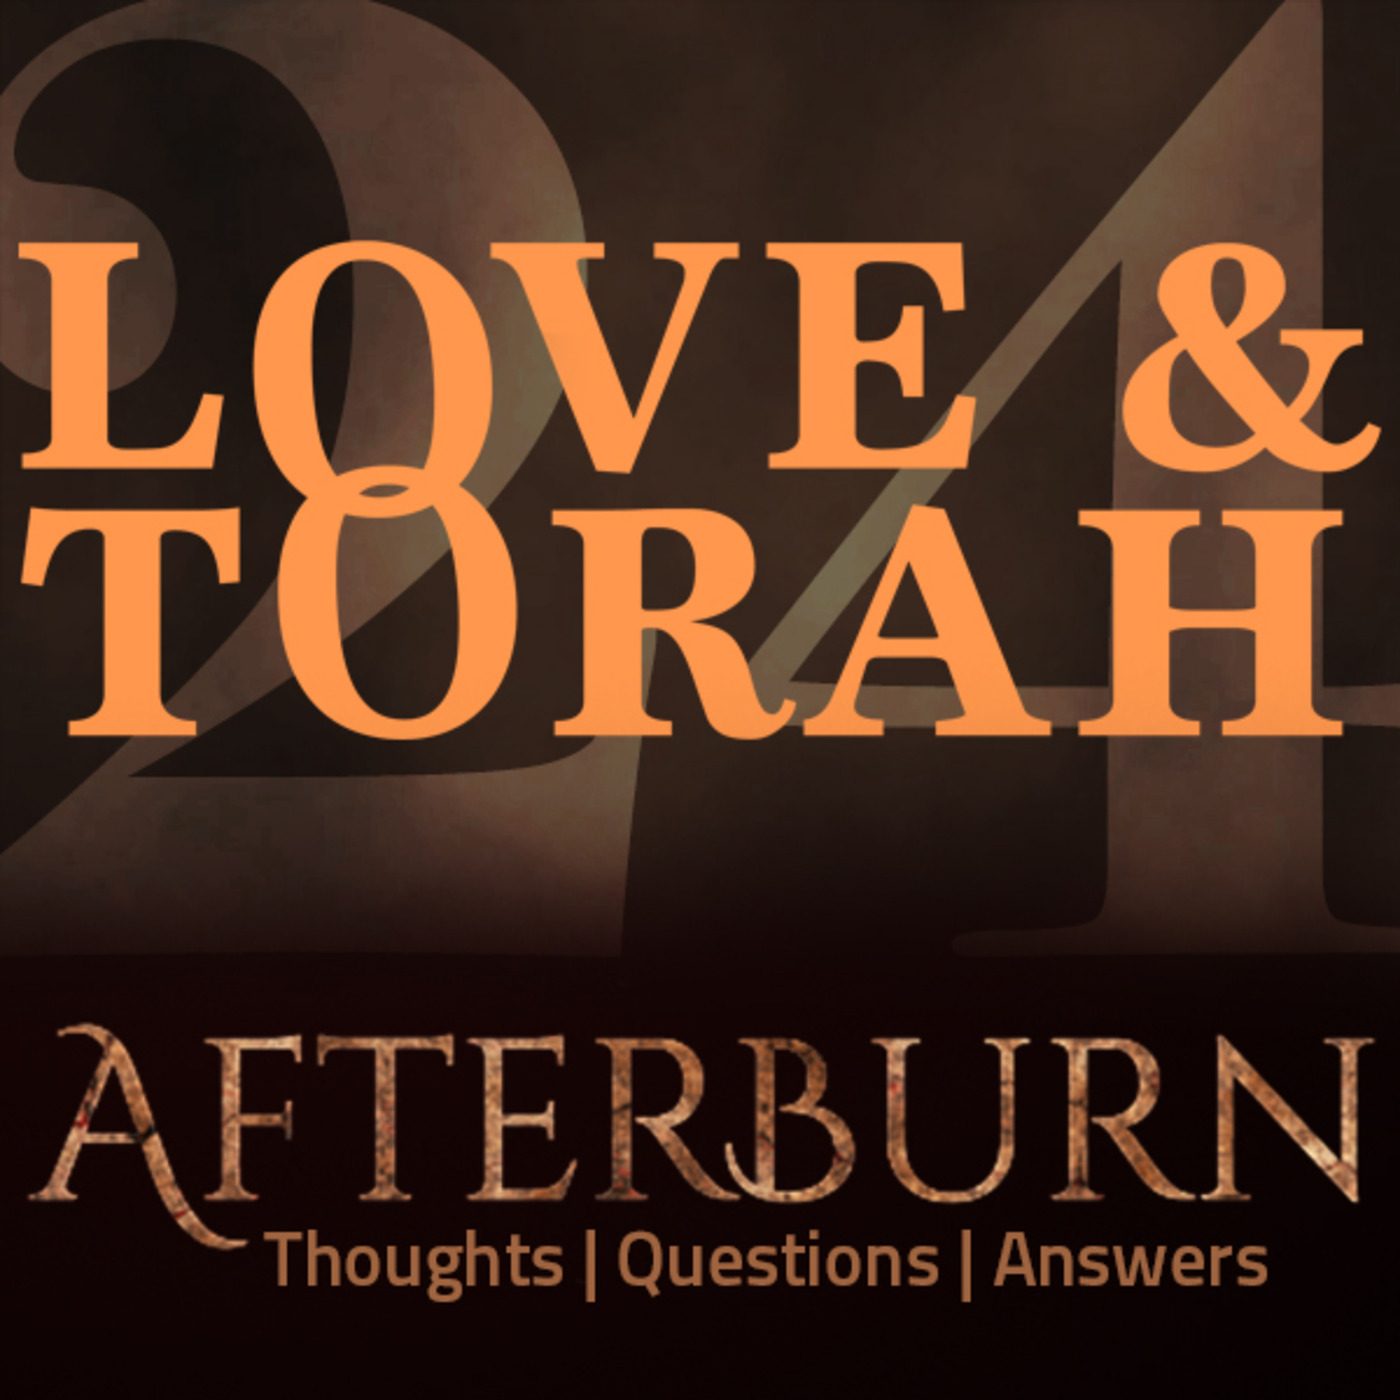 Episode 607: Afterburn | Thoughts, Q&A on Love and Torah | Part 24